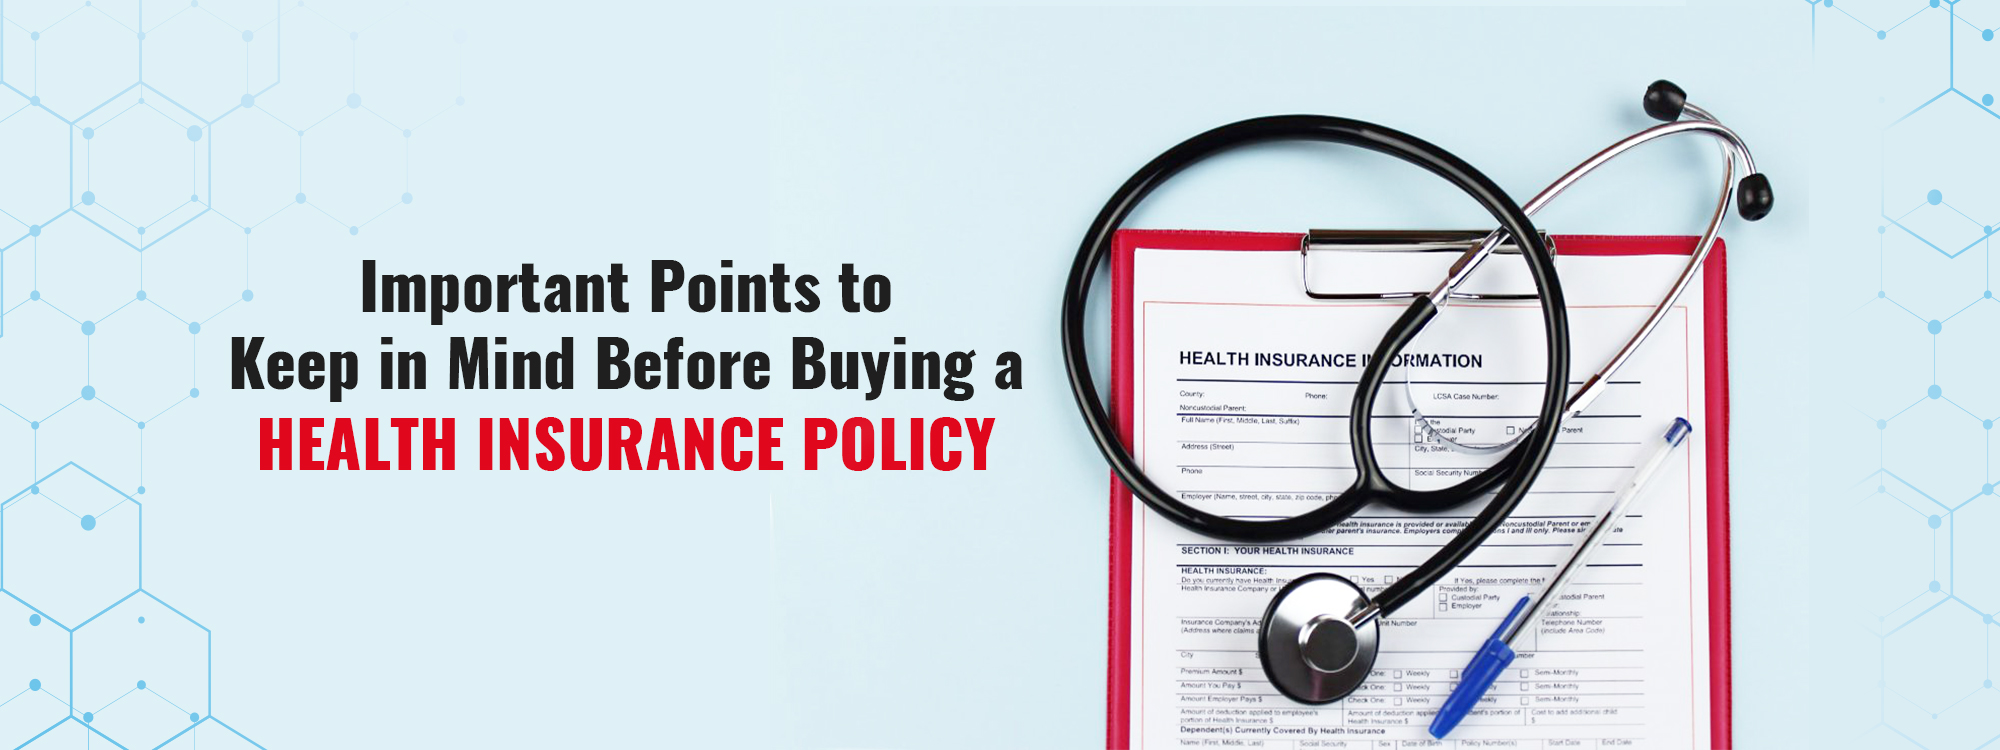 Important Points to Keep in Mind Before Buying a Health Insurance Policy